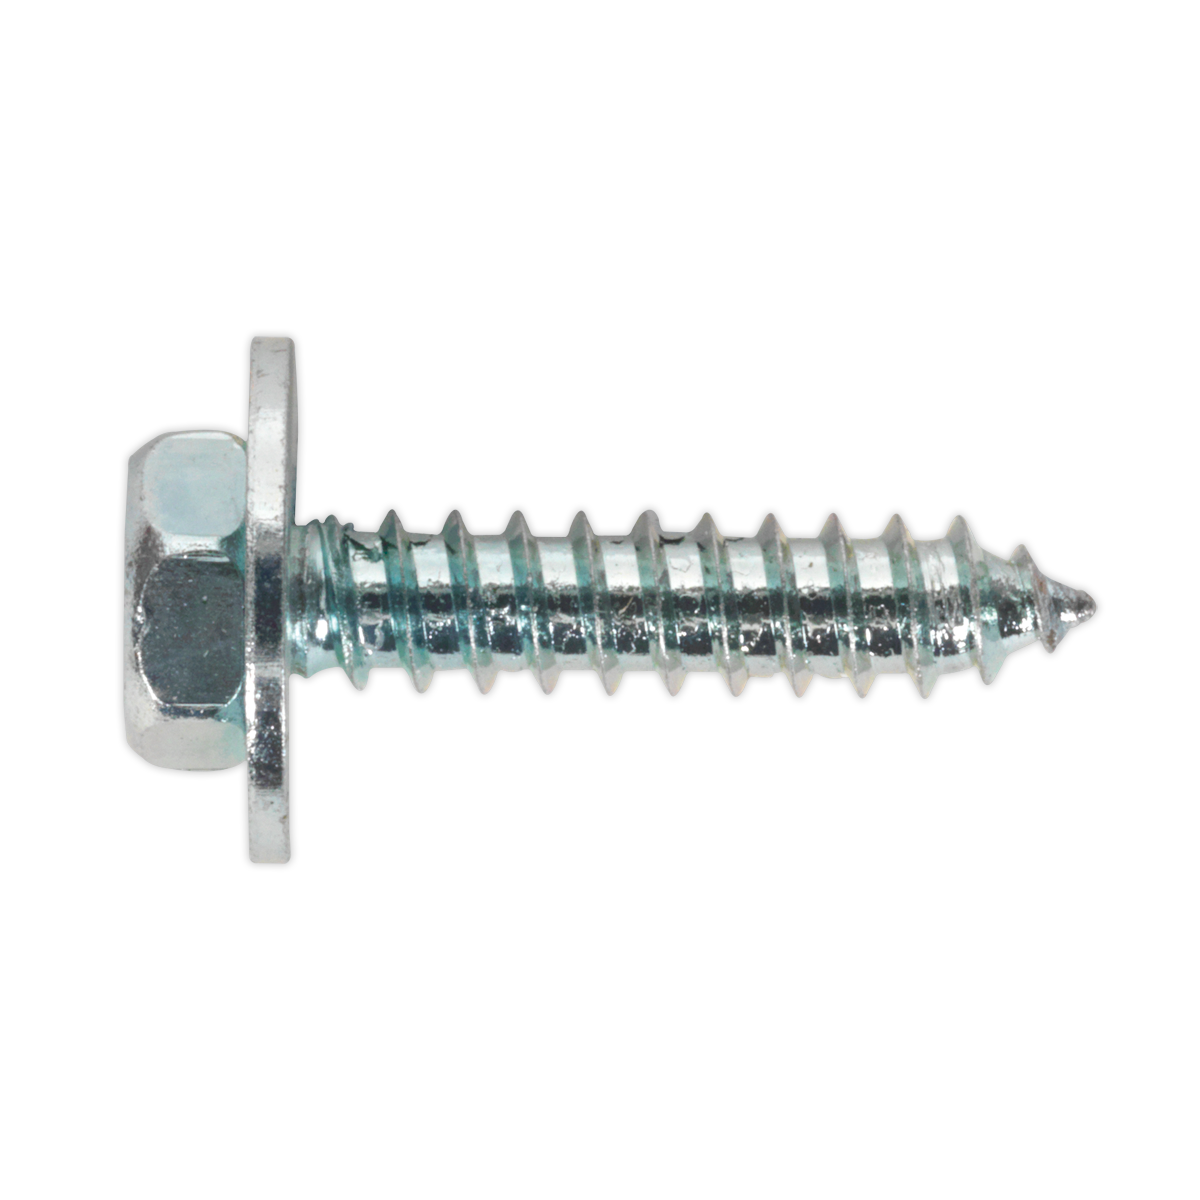 Acme Screw with Captive Washer M8 x 3/4" Zinc Pack of 100 - ASW8 - Farming Parts